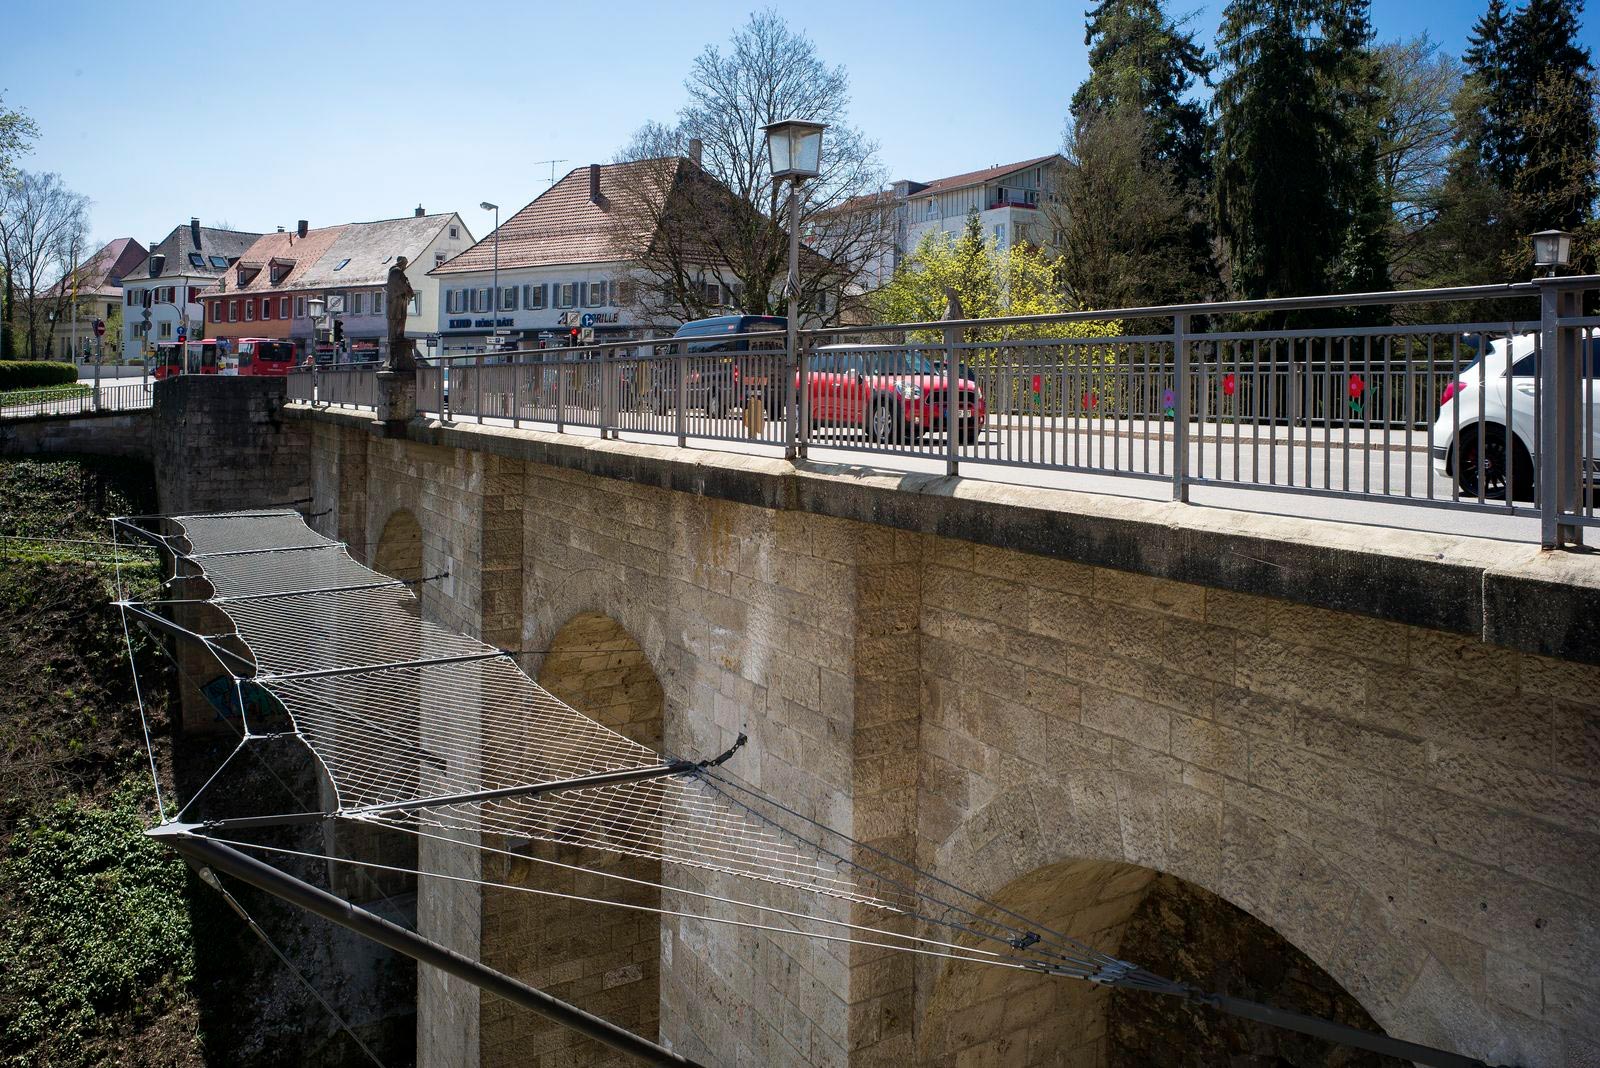 The Hochbrücke in Rottweil, Germany, with a safety and suicide prevention net by Jakob Rope Systems